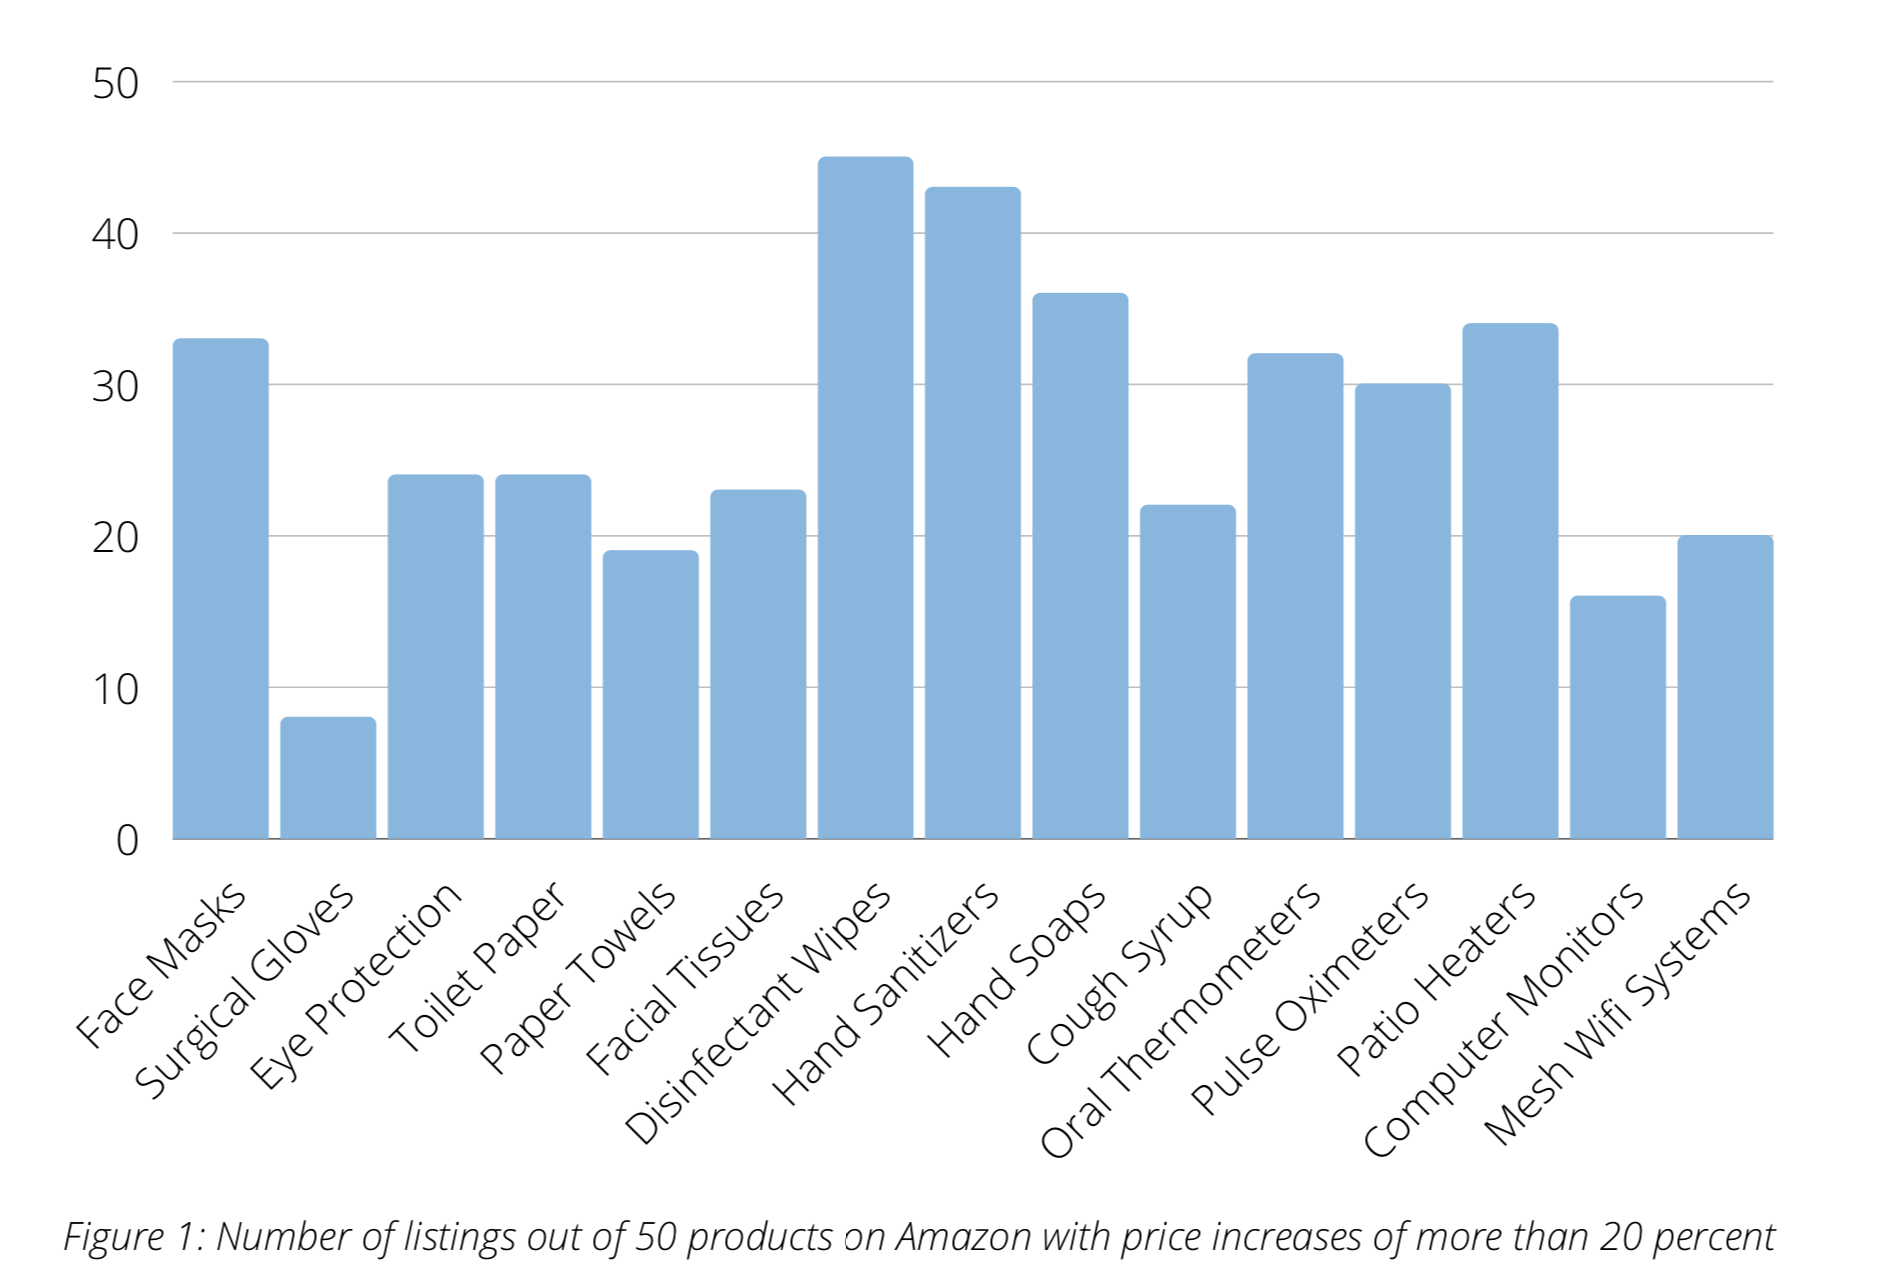 Figure 1. Number of listing out of 50 products on Amazon with price increases of more than 20 percent.